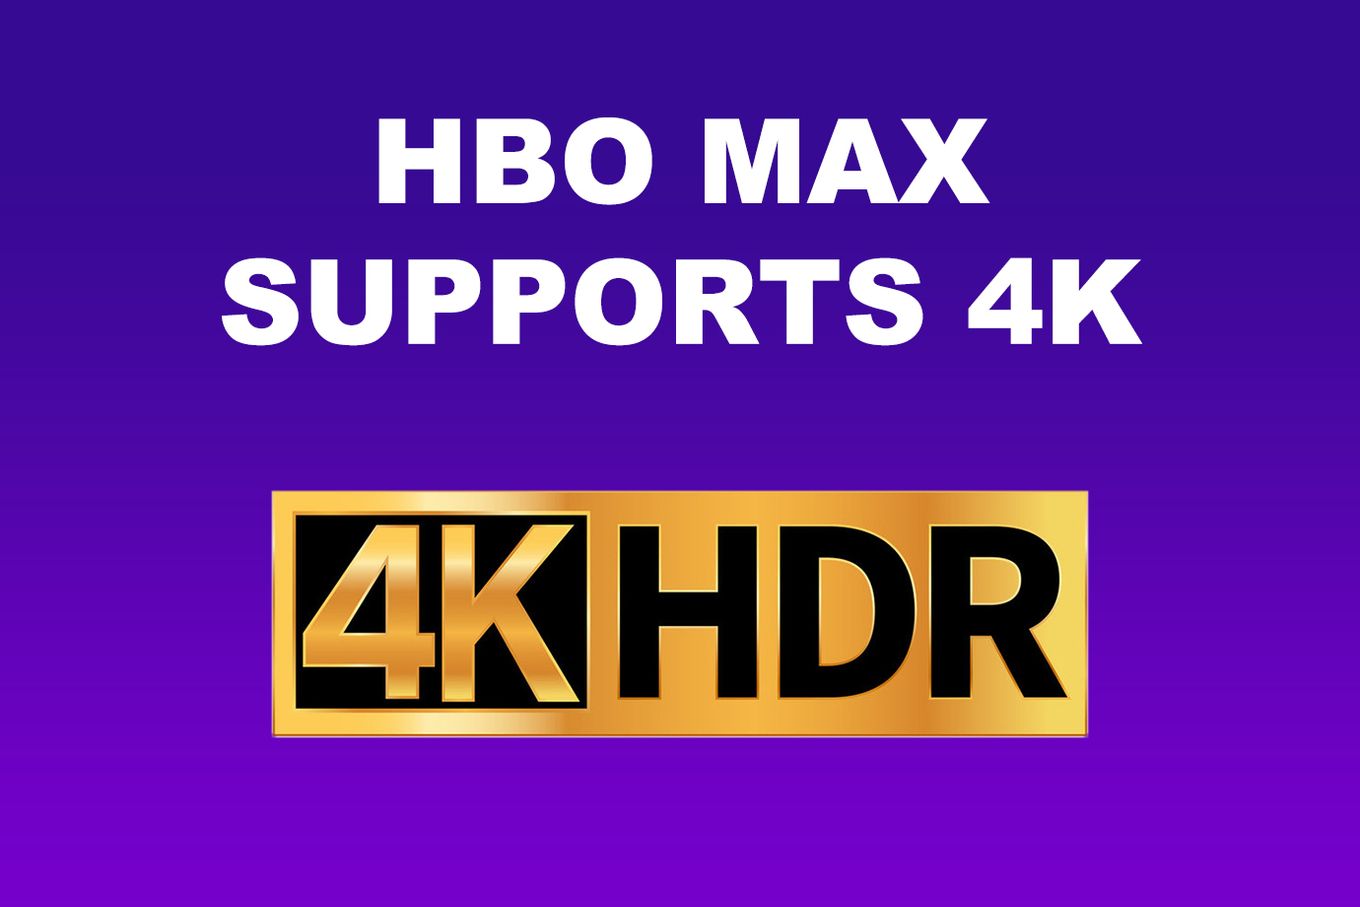 HBO MAX Supports 4K